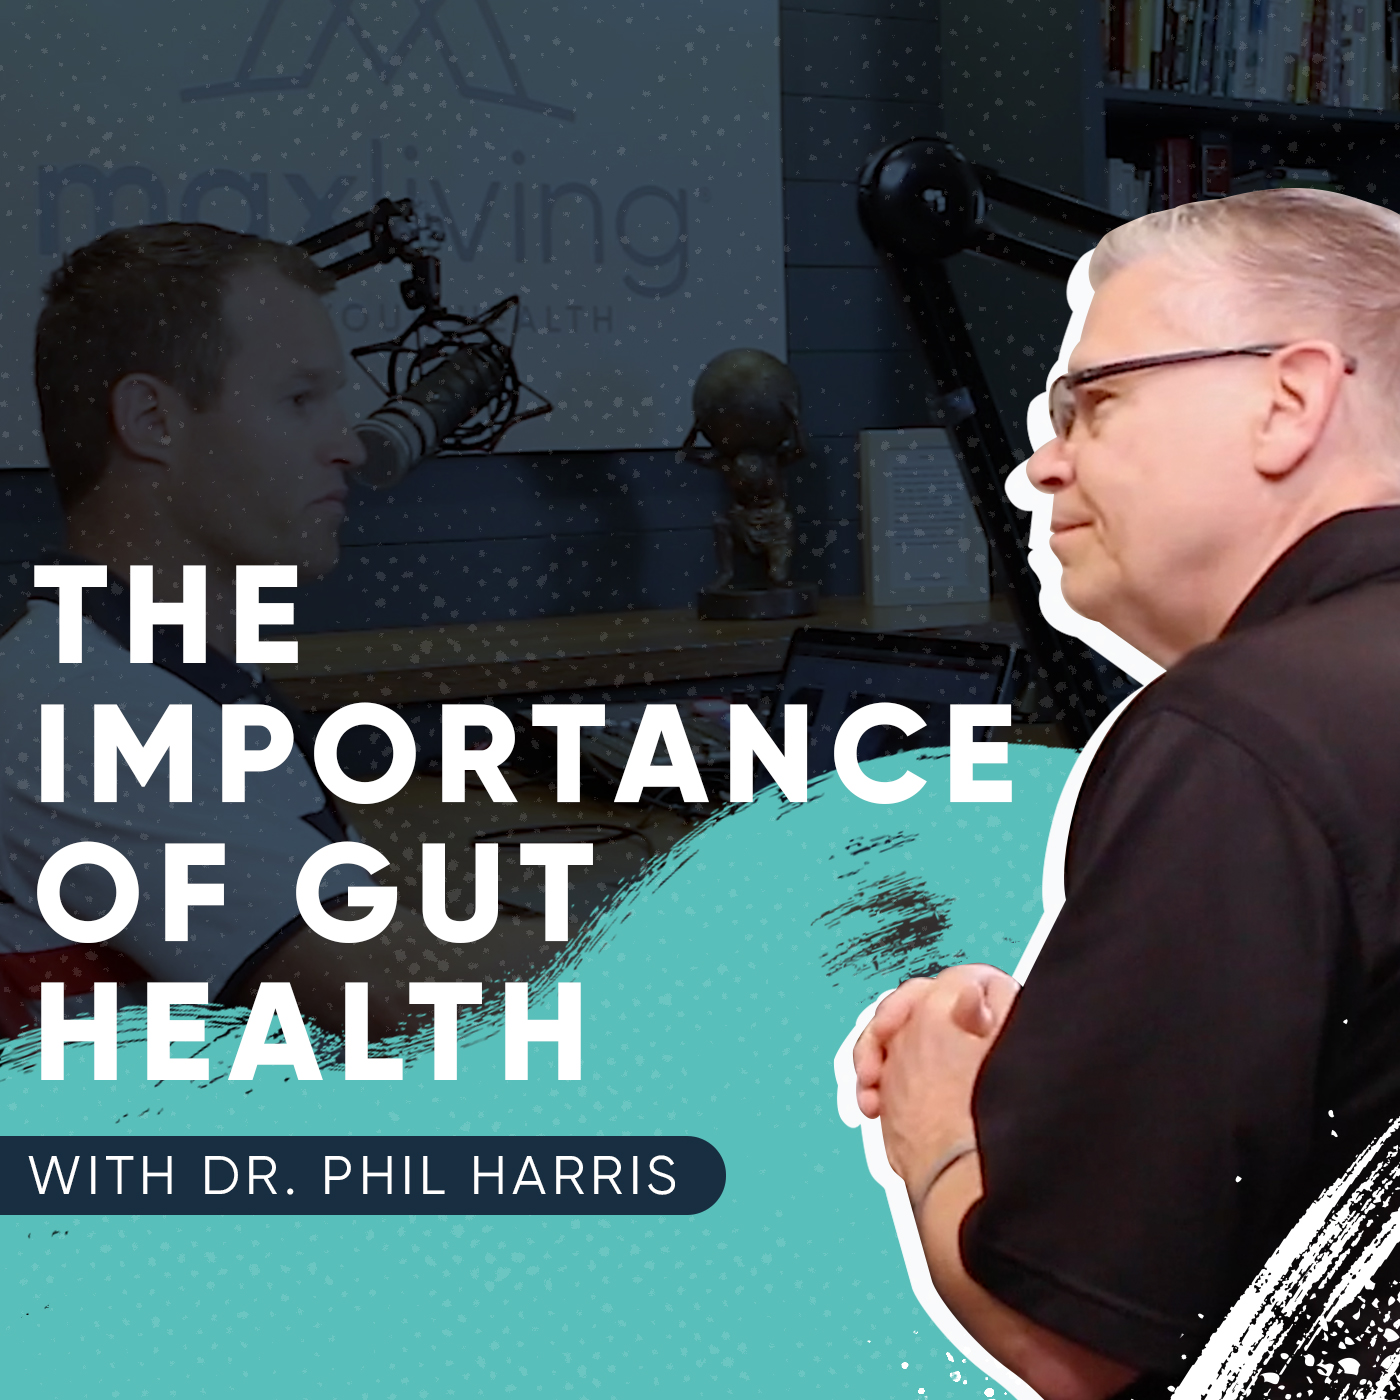 The Importance of Gut Health with Dr. Phil Harris